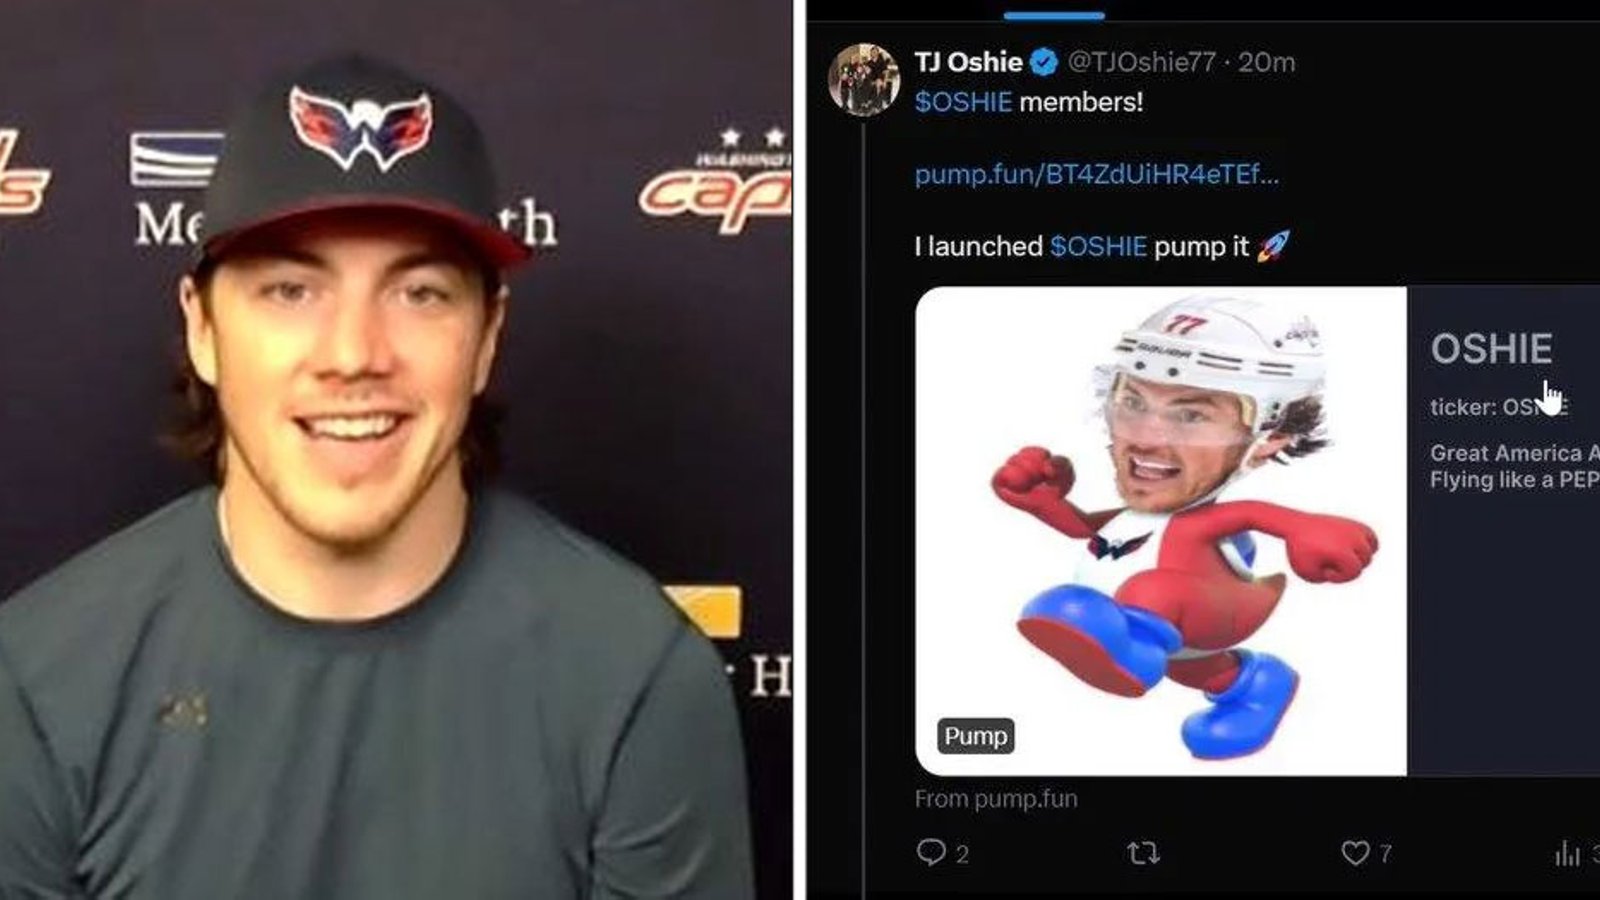 TJ Oshie accused of scamming his fans online